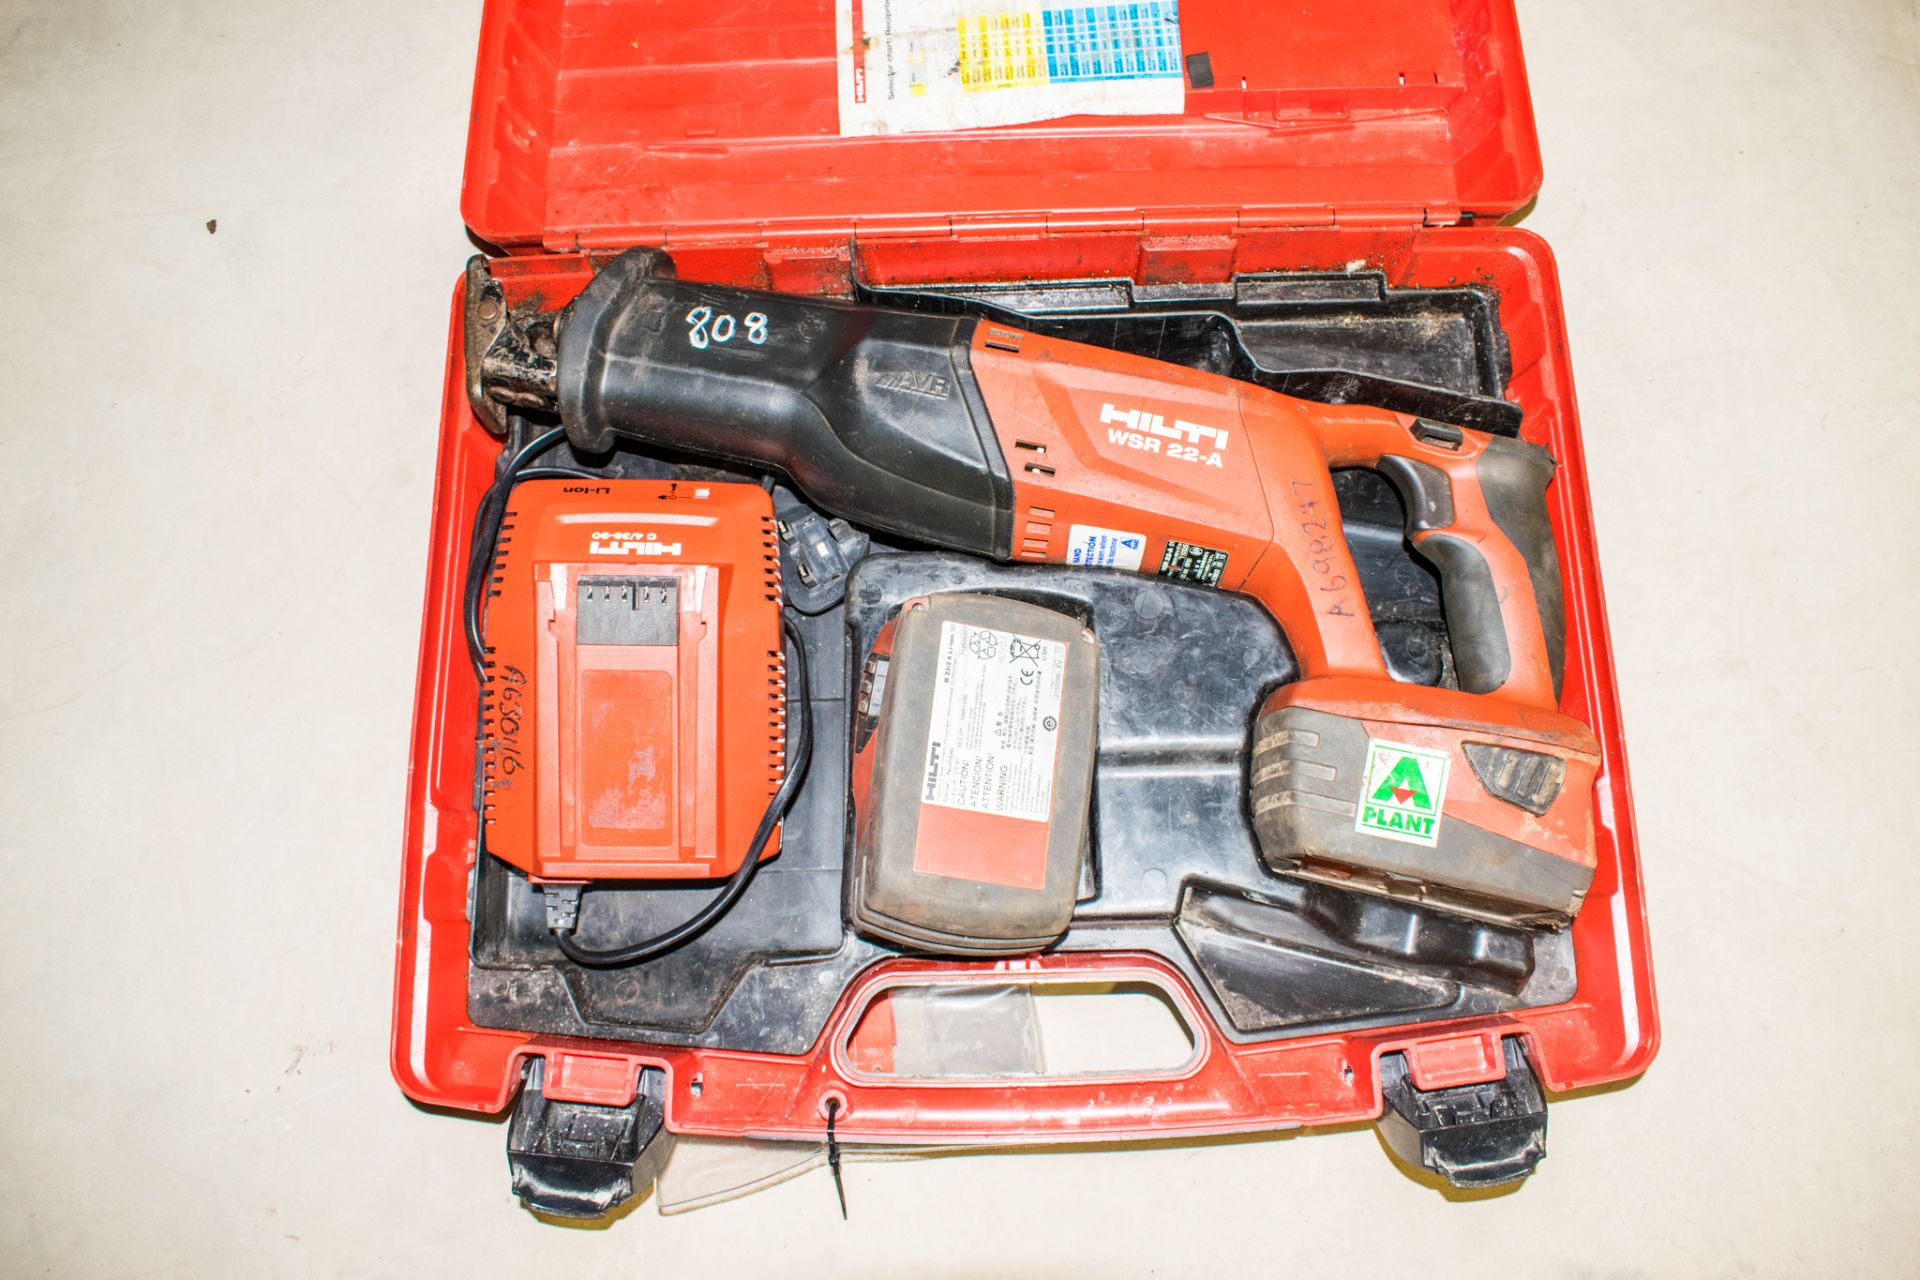 Hilti WSR 22-A 21.6v cordless reciprocating saw c/w 2 batteries, charger & carry case A698247